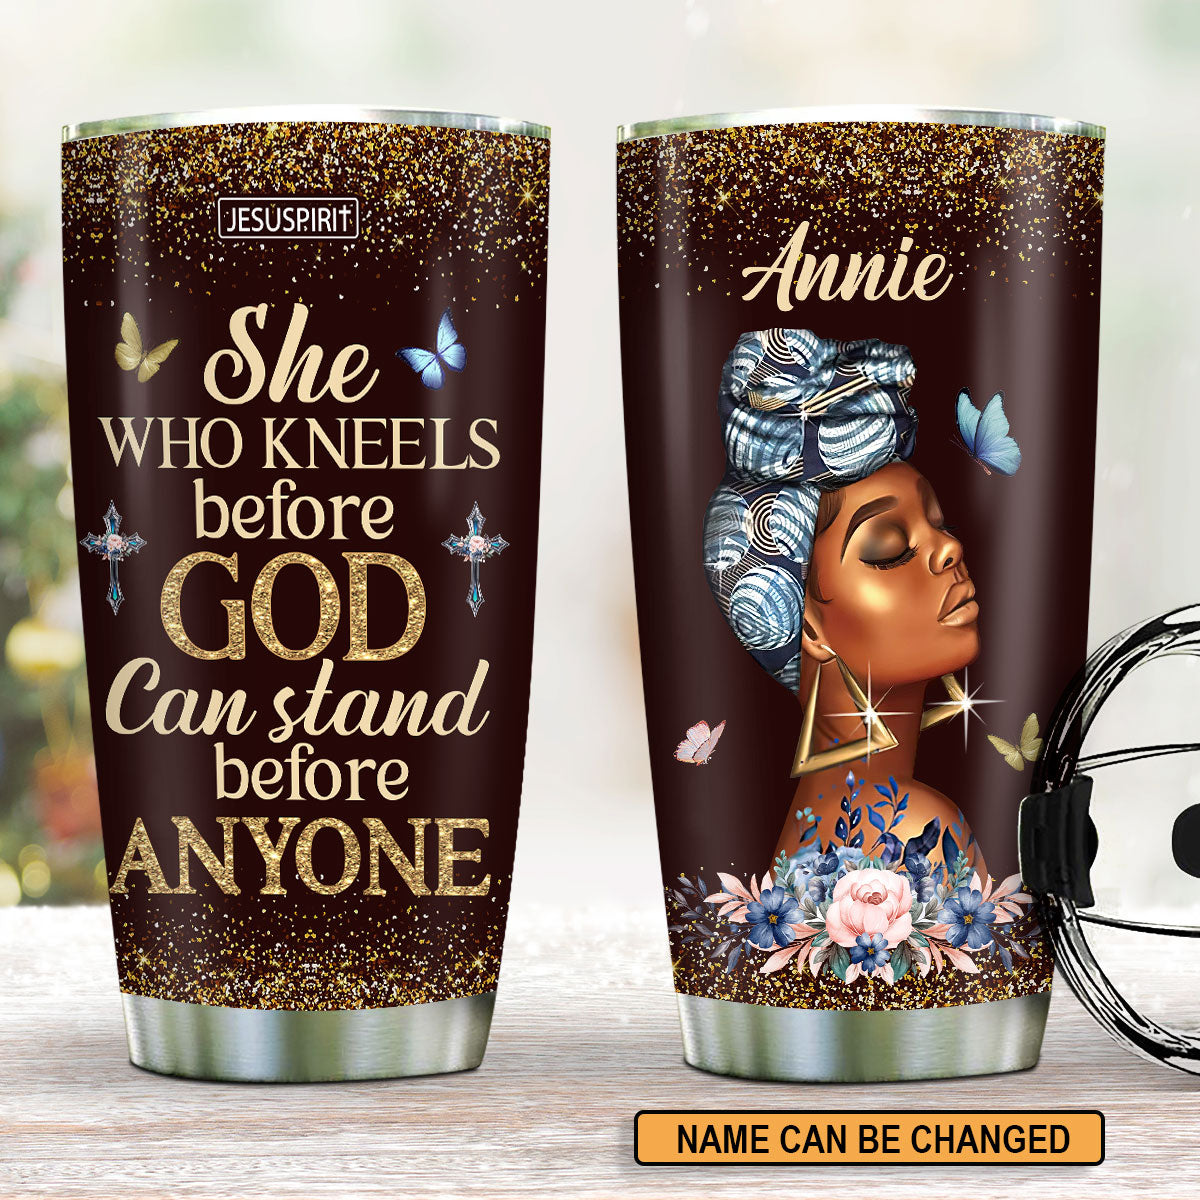 Black Queen - Personalized Tumbler Cup